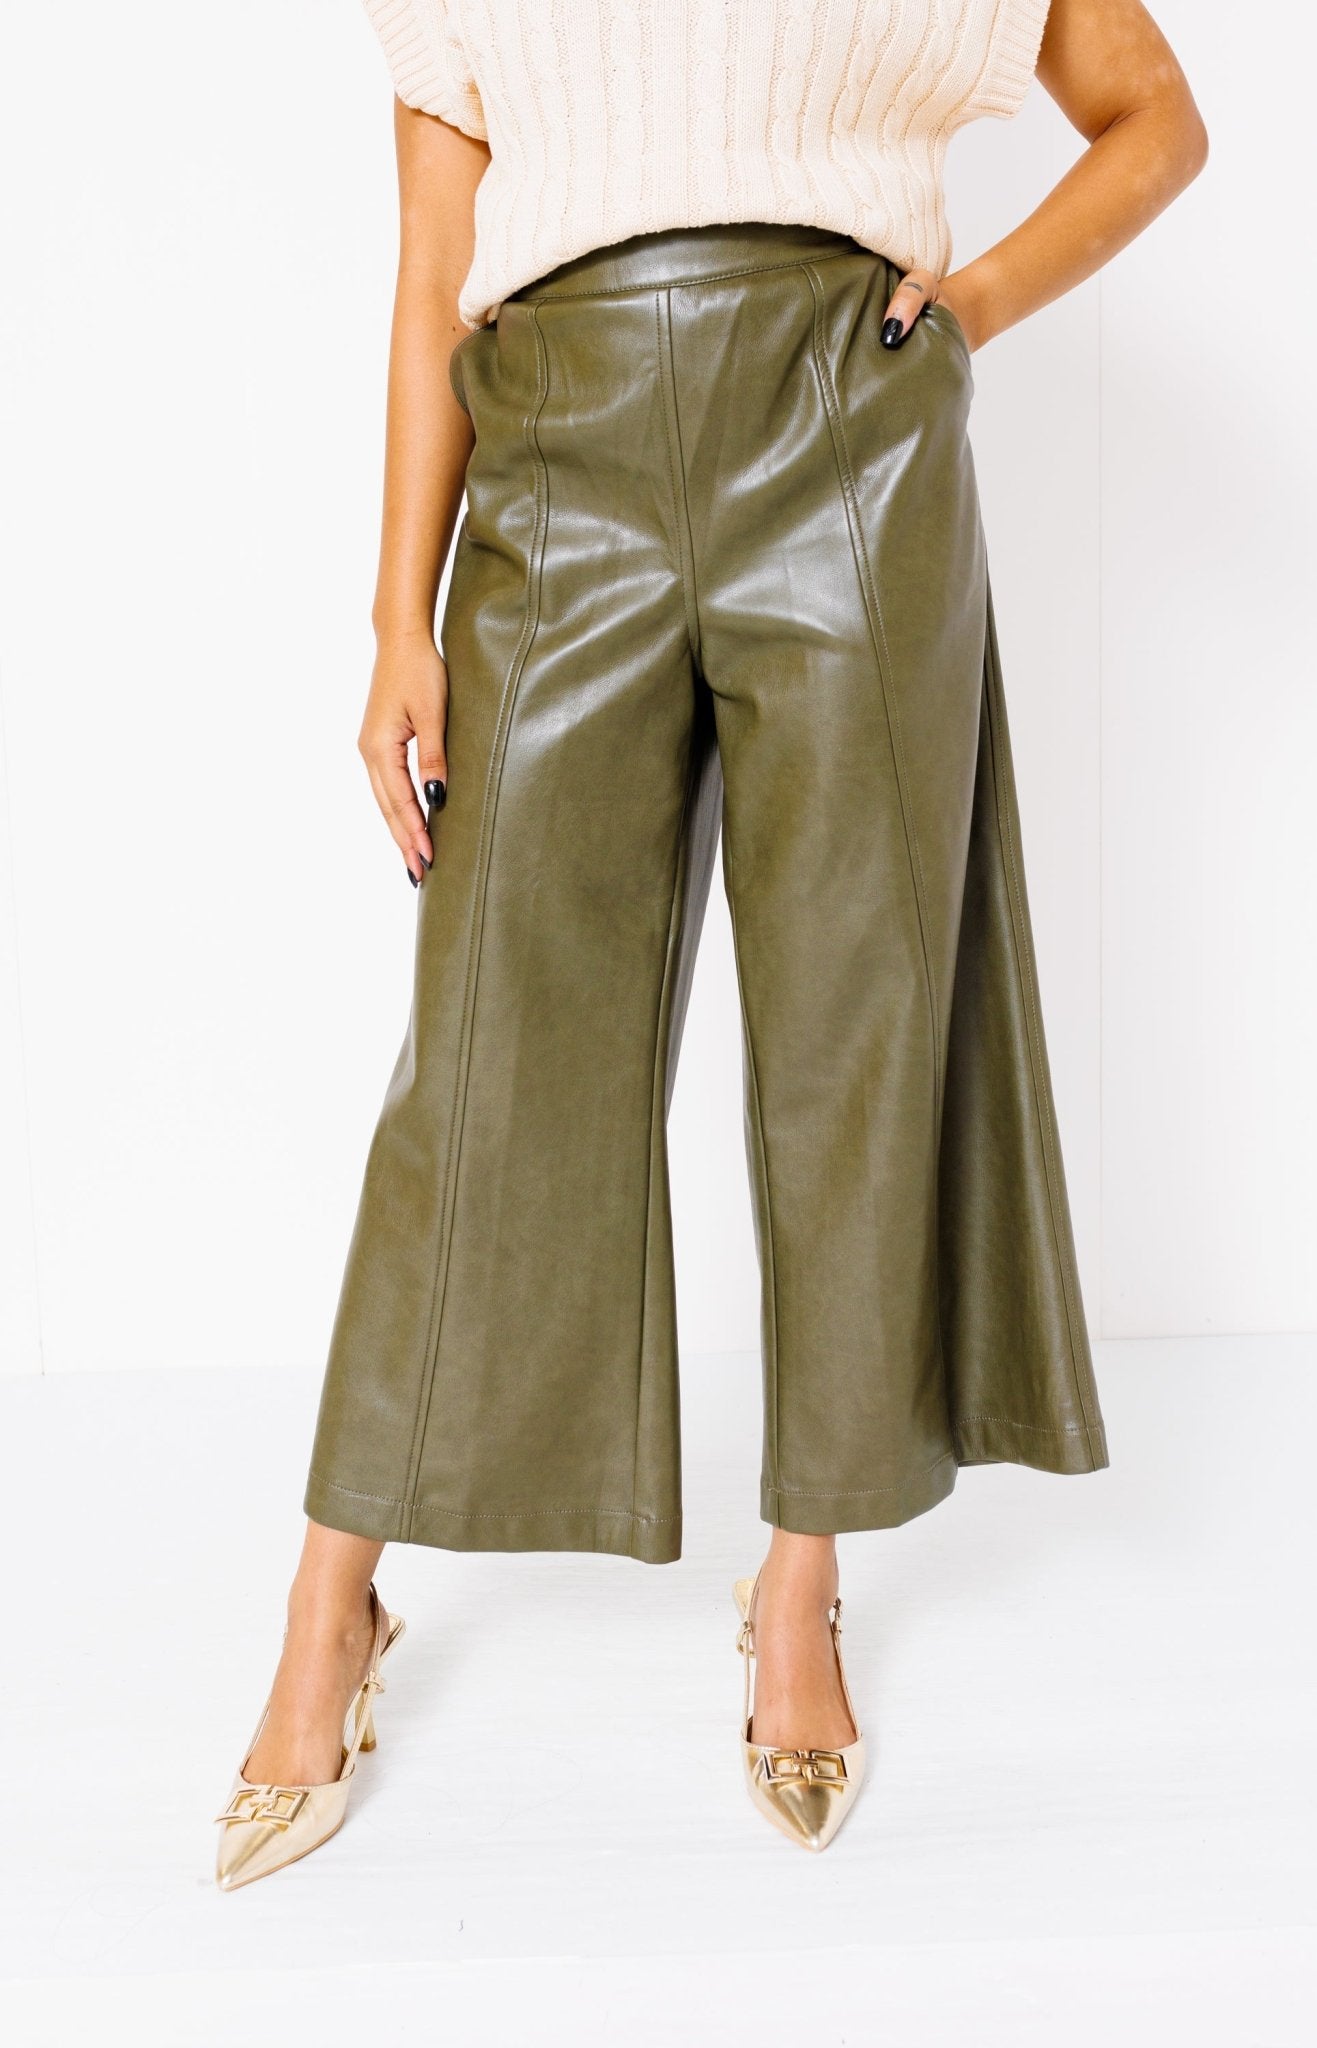 Dolce Cabo: Modern Moments Vegan Leather Pants, ARMY Pants - 32P